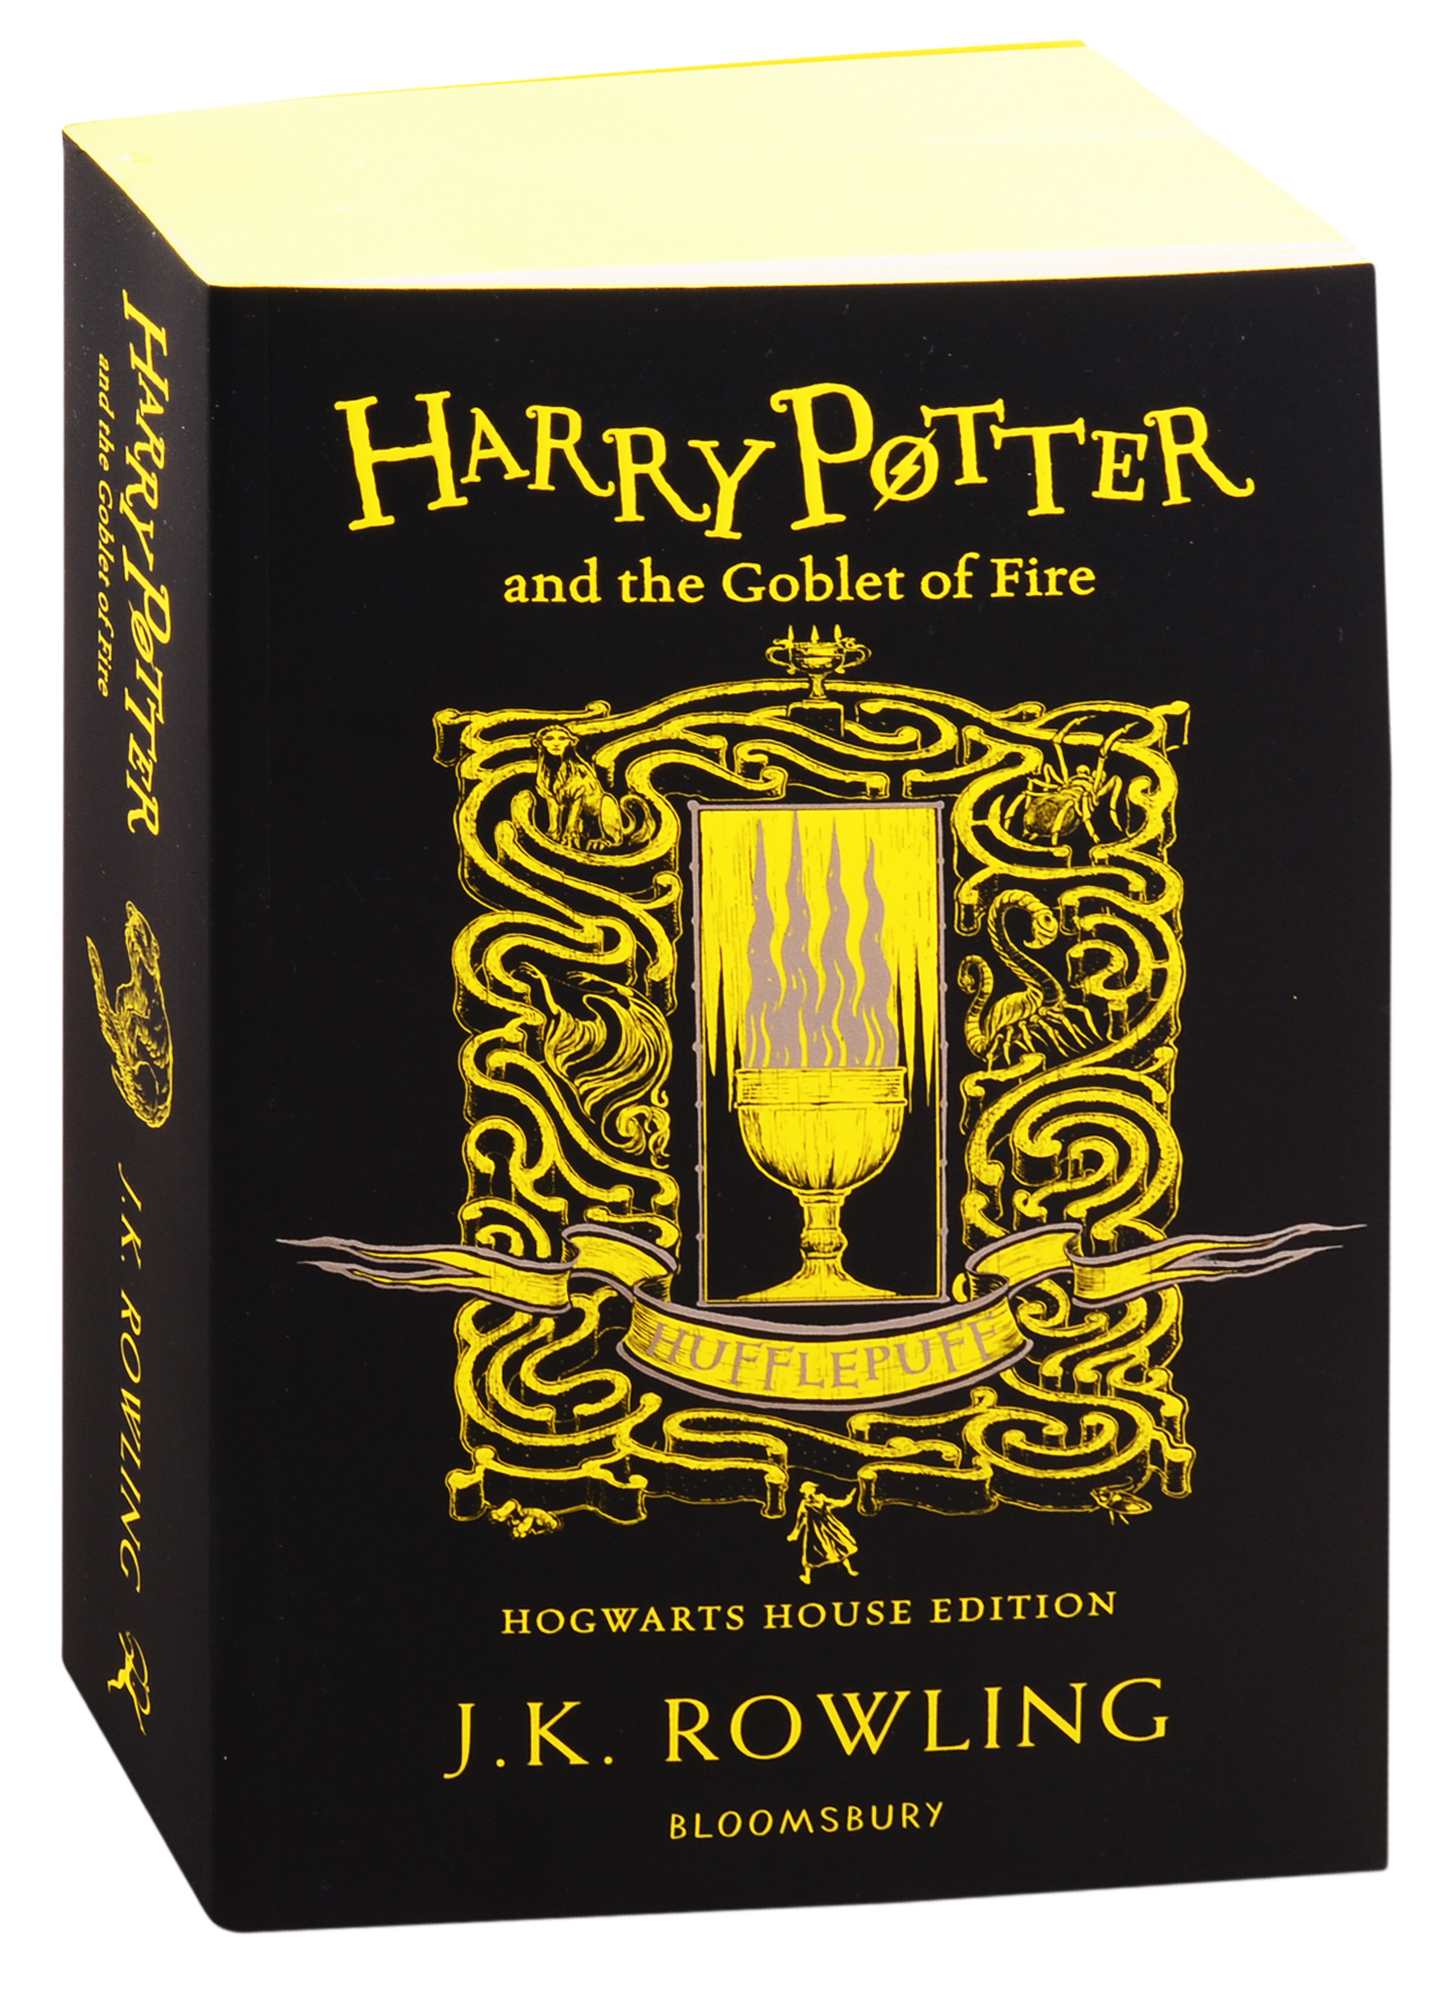 rowling joanne harry potter and the goblet of fire hufflepuff edition Роулинг Джоан Кэтлин Harry Potter and the Goblet of Fire Hufflepuff